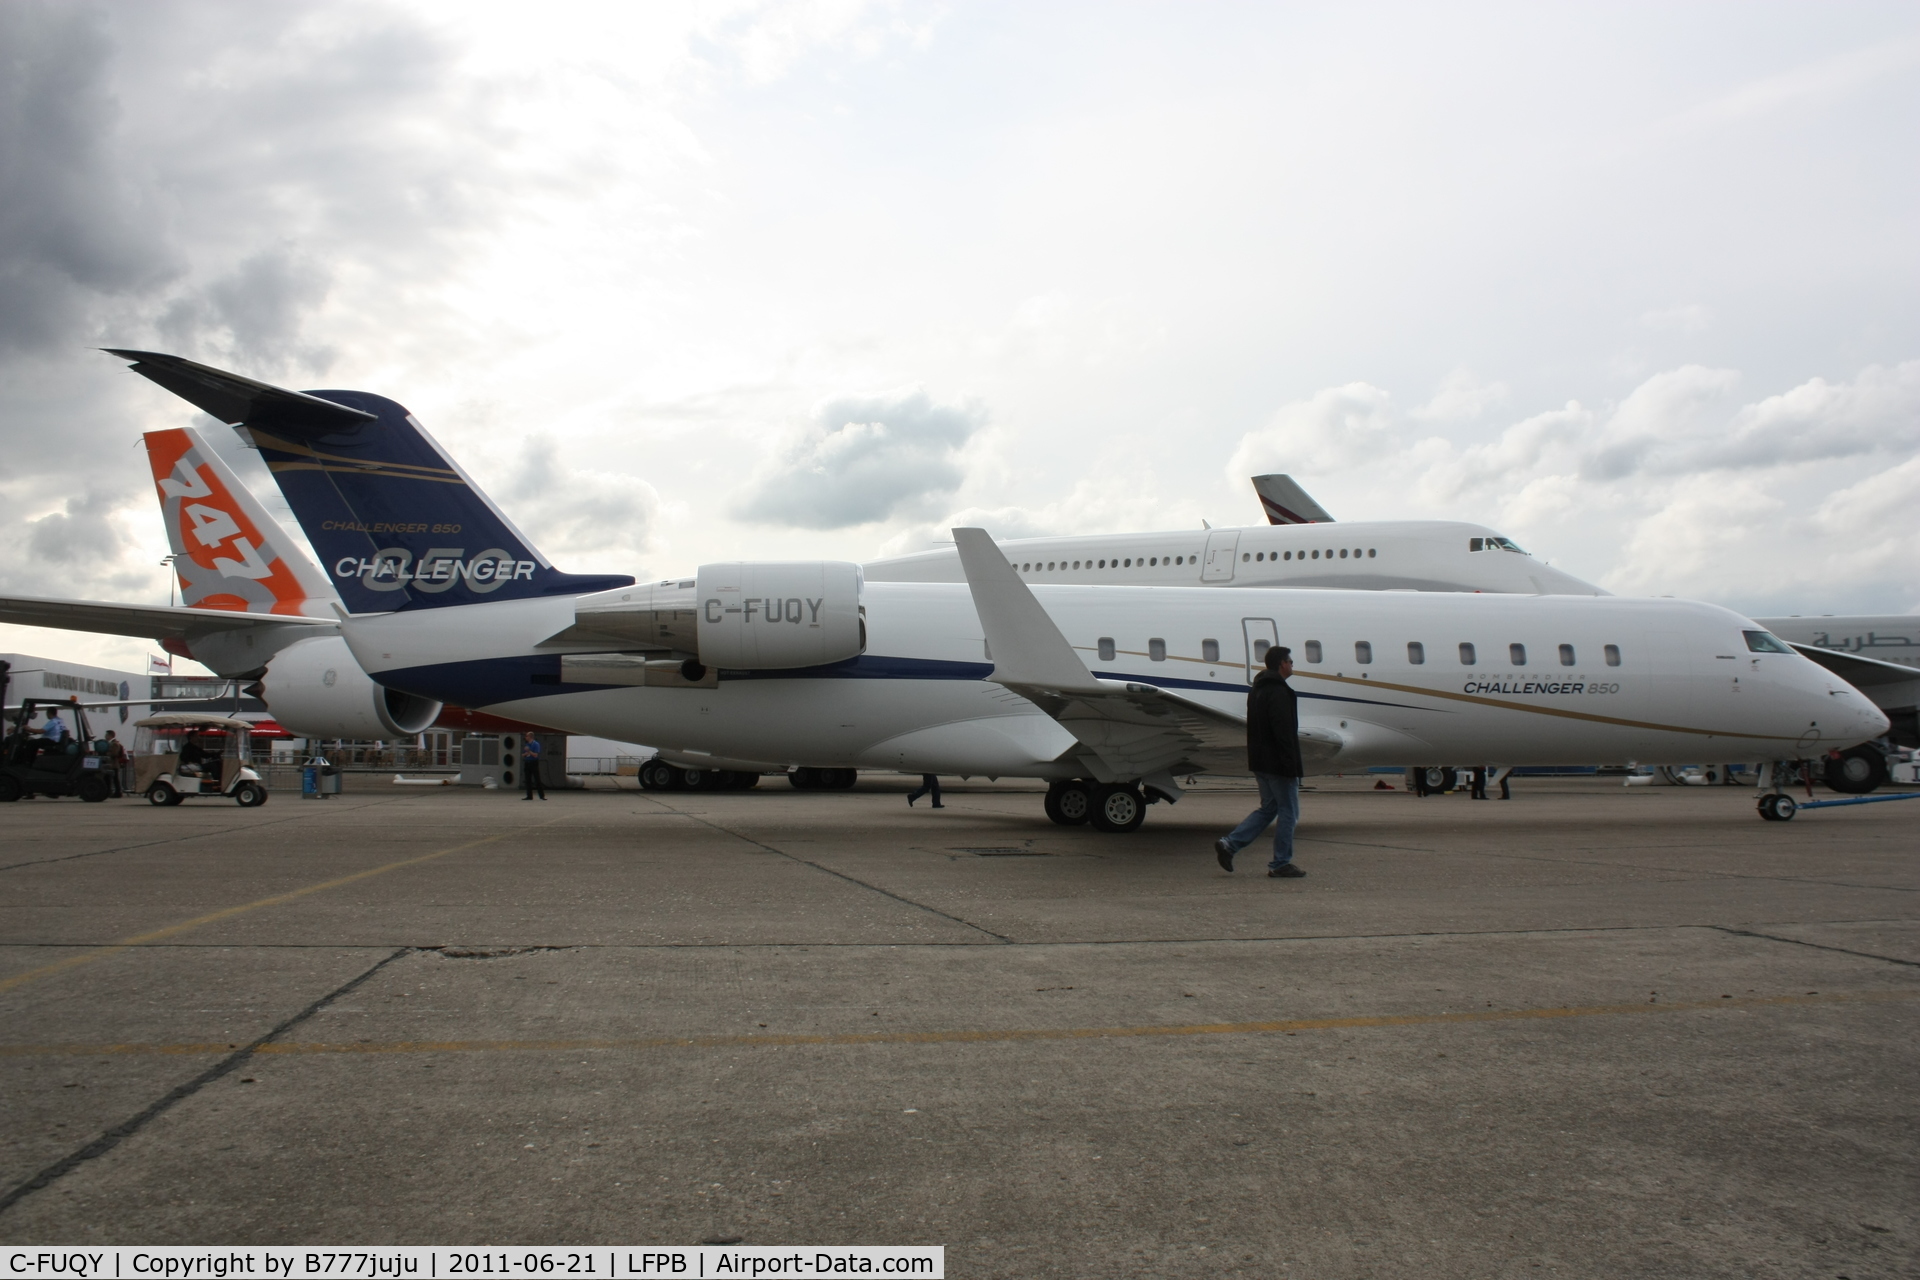 C-FUQY, 2008 Bombardier Challenger 850 (CL-600-2B19) C/N 8095, on dispaly at SIAE 2011